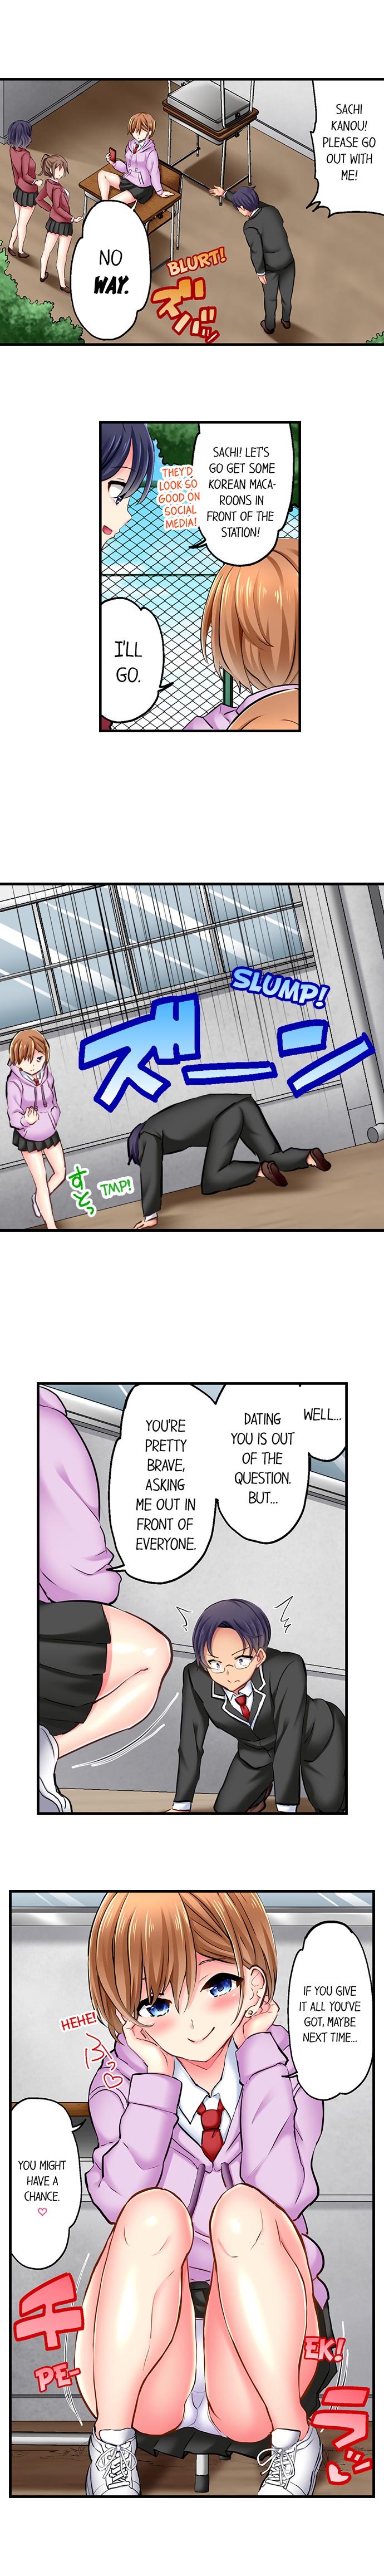 Sex in the Adult Toys Section - Chapter 1 Page 2